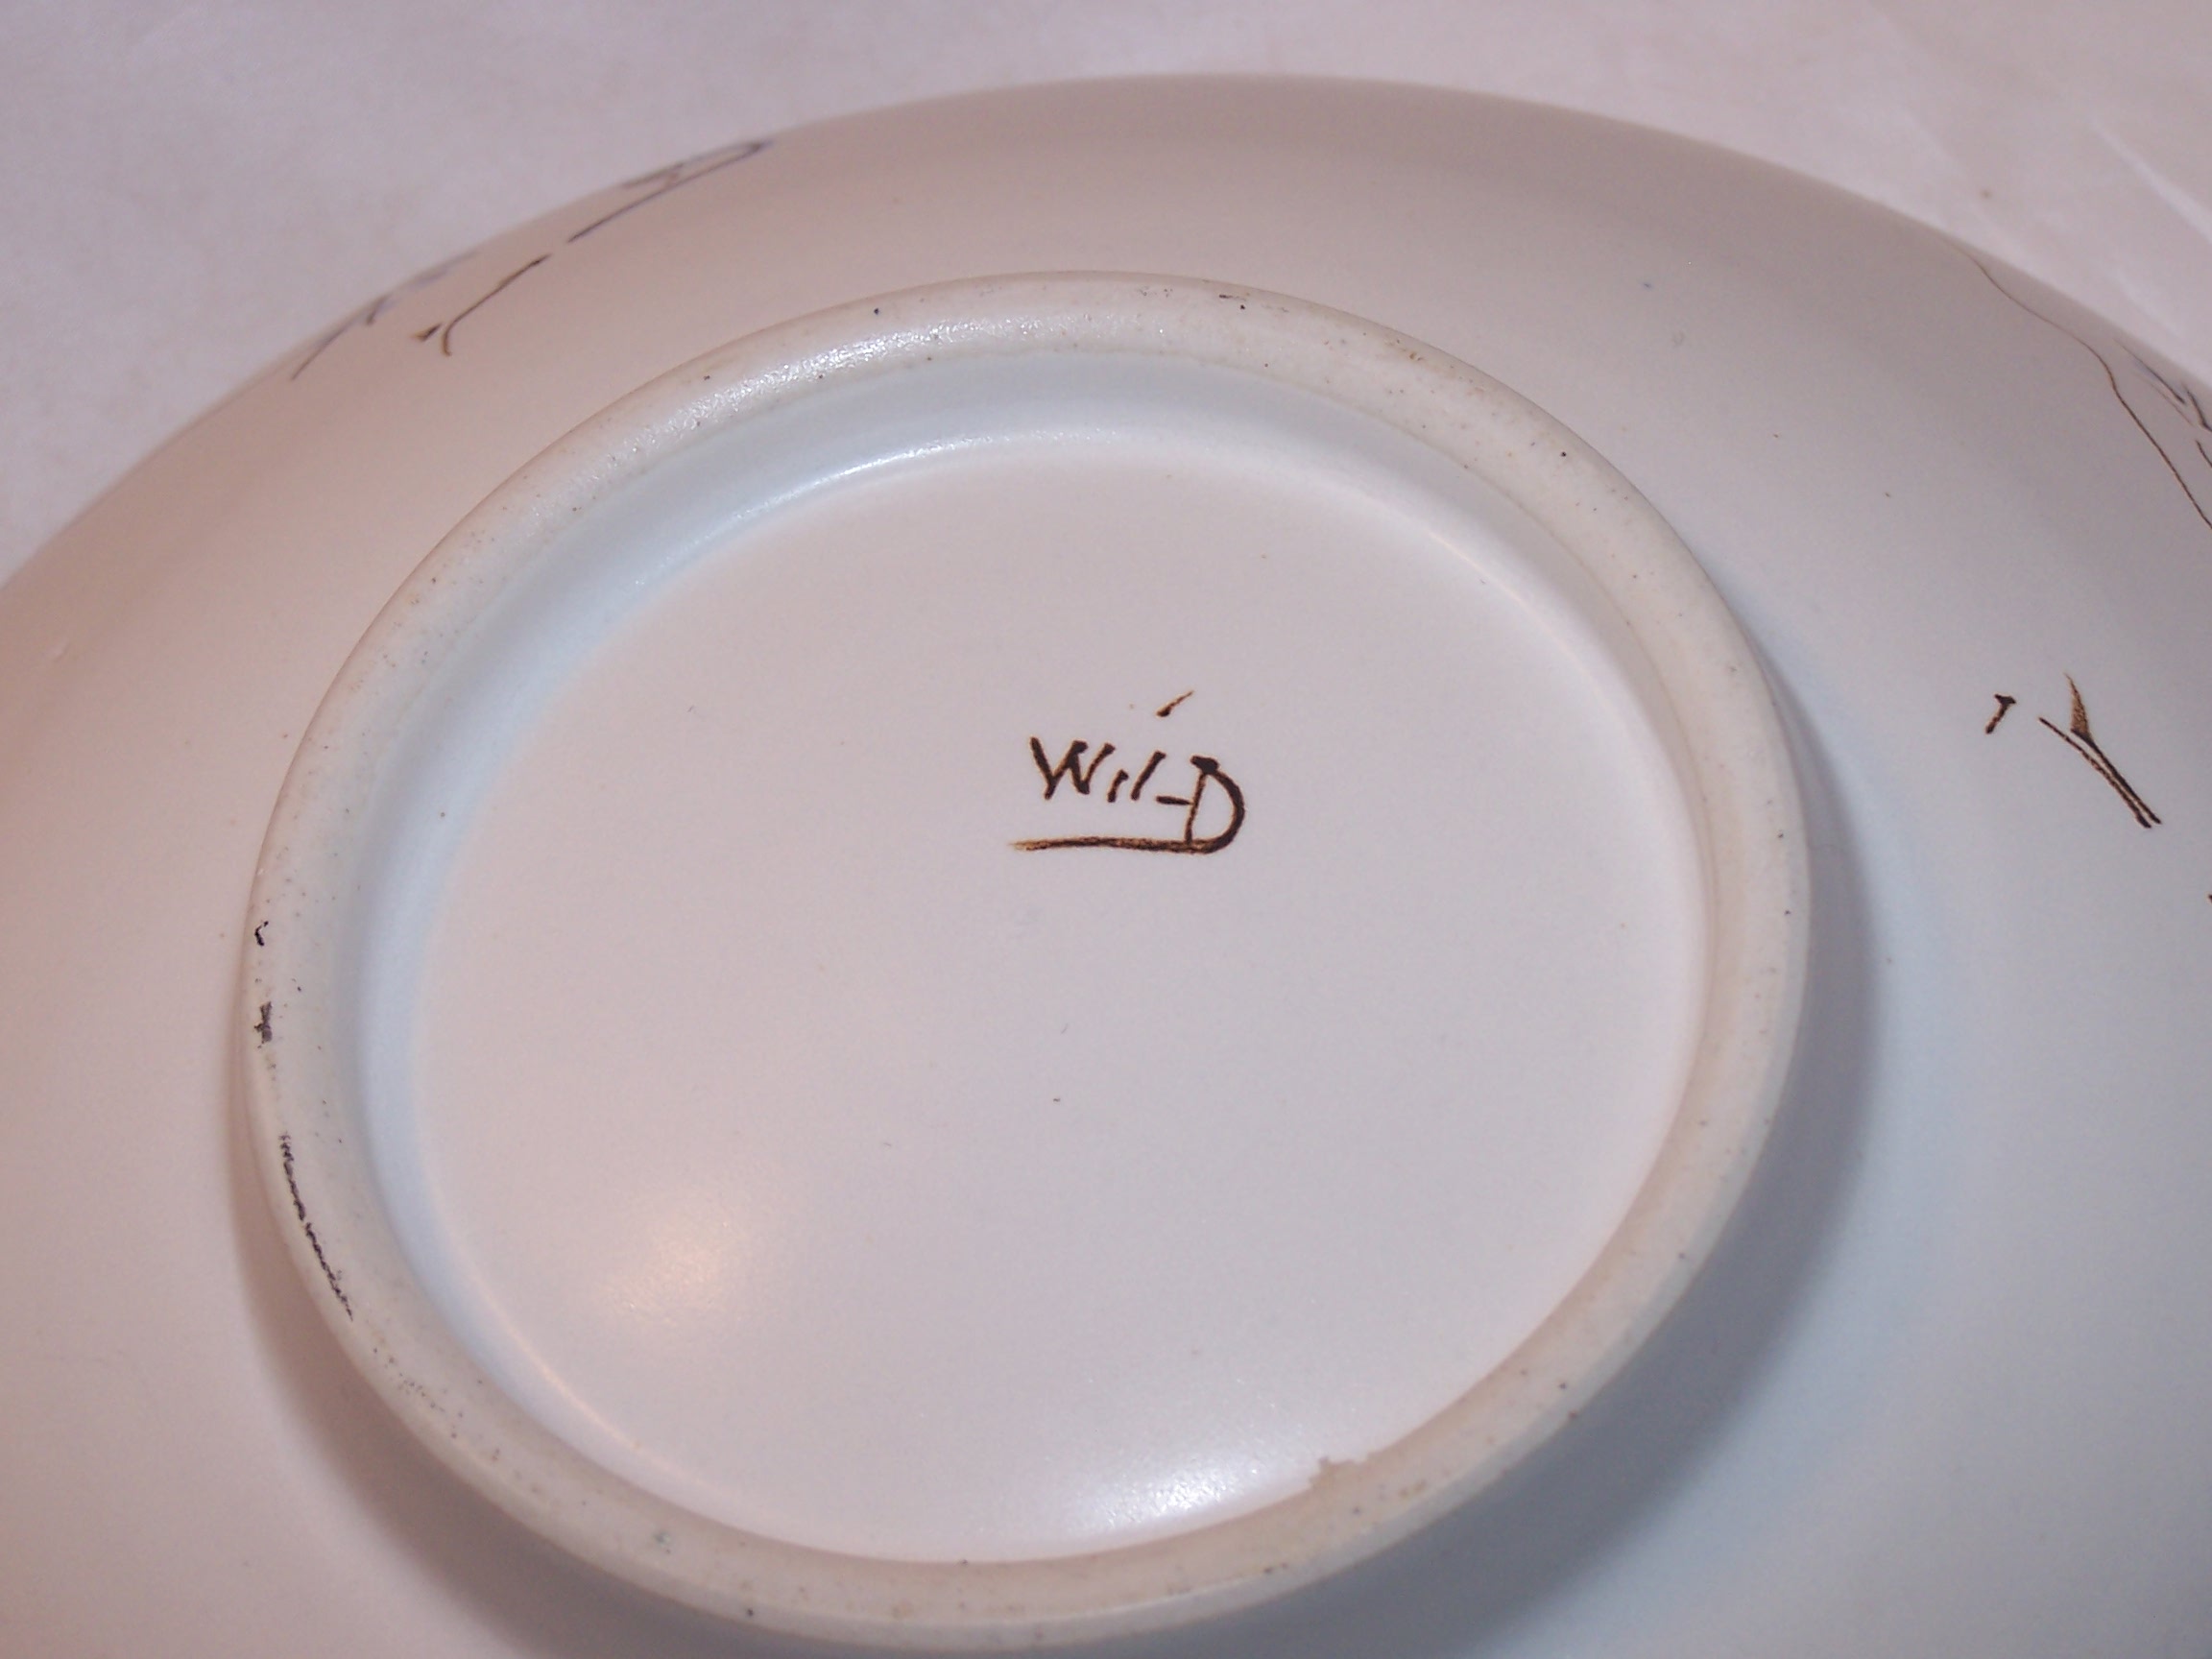 Image 5 of Hummingbird Decorated Pottery Bowl, Artist Signed, Wil-D Studio